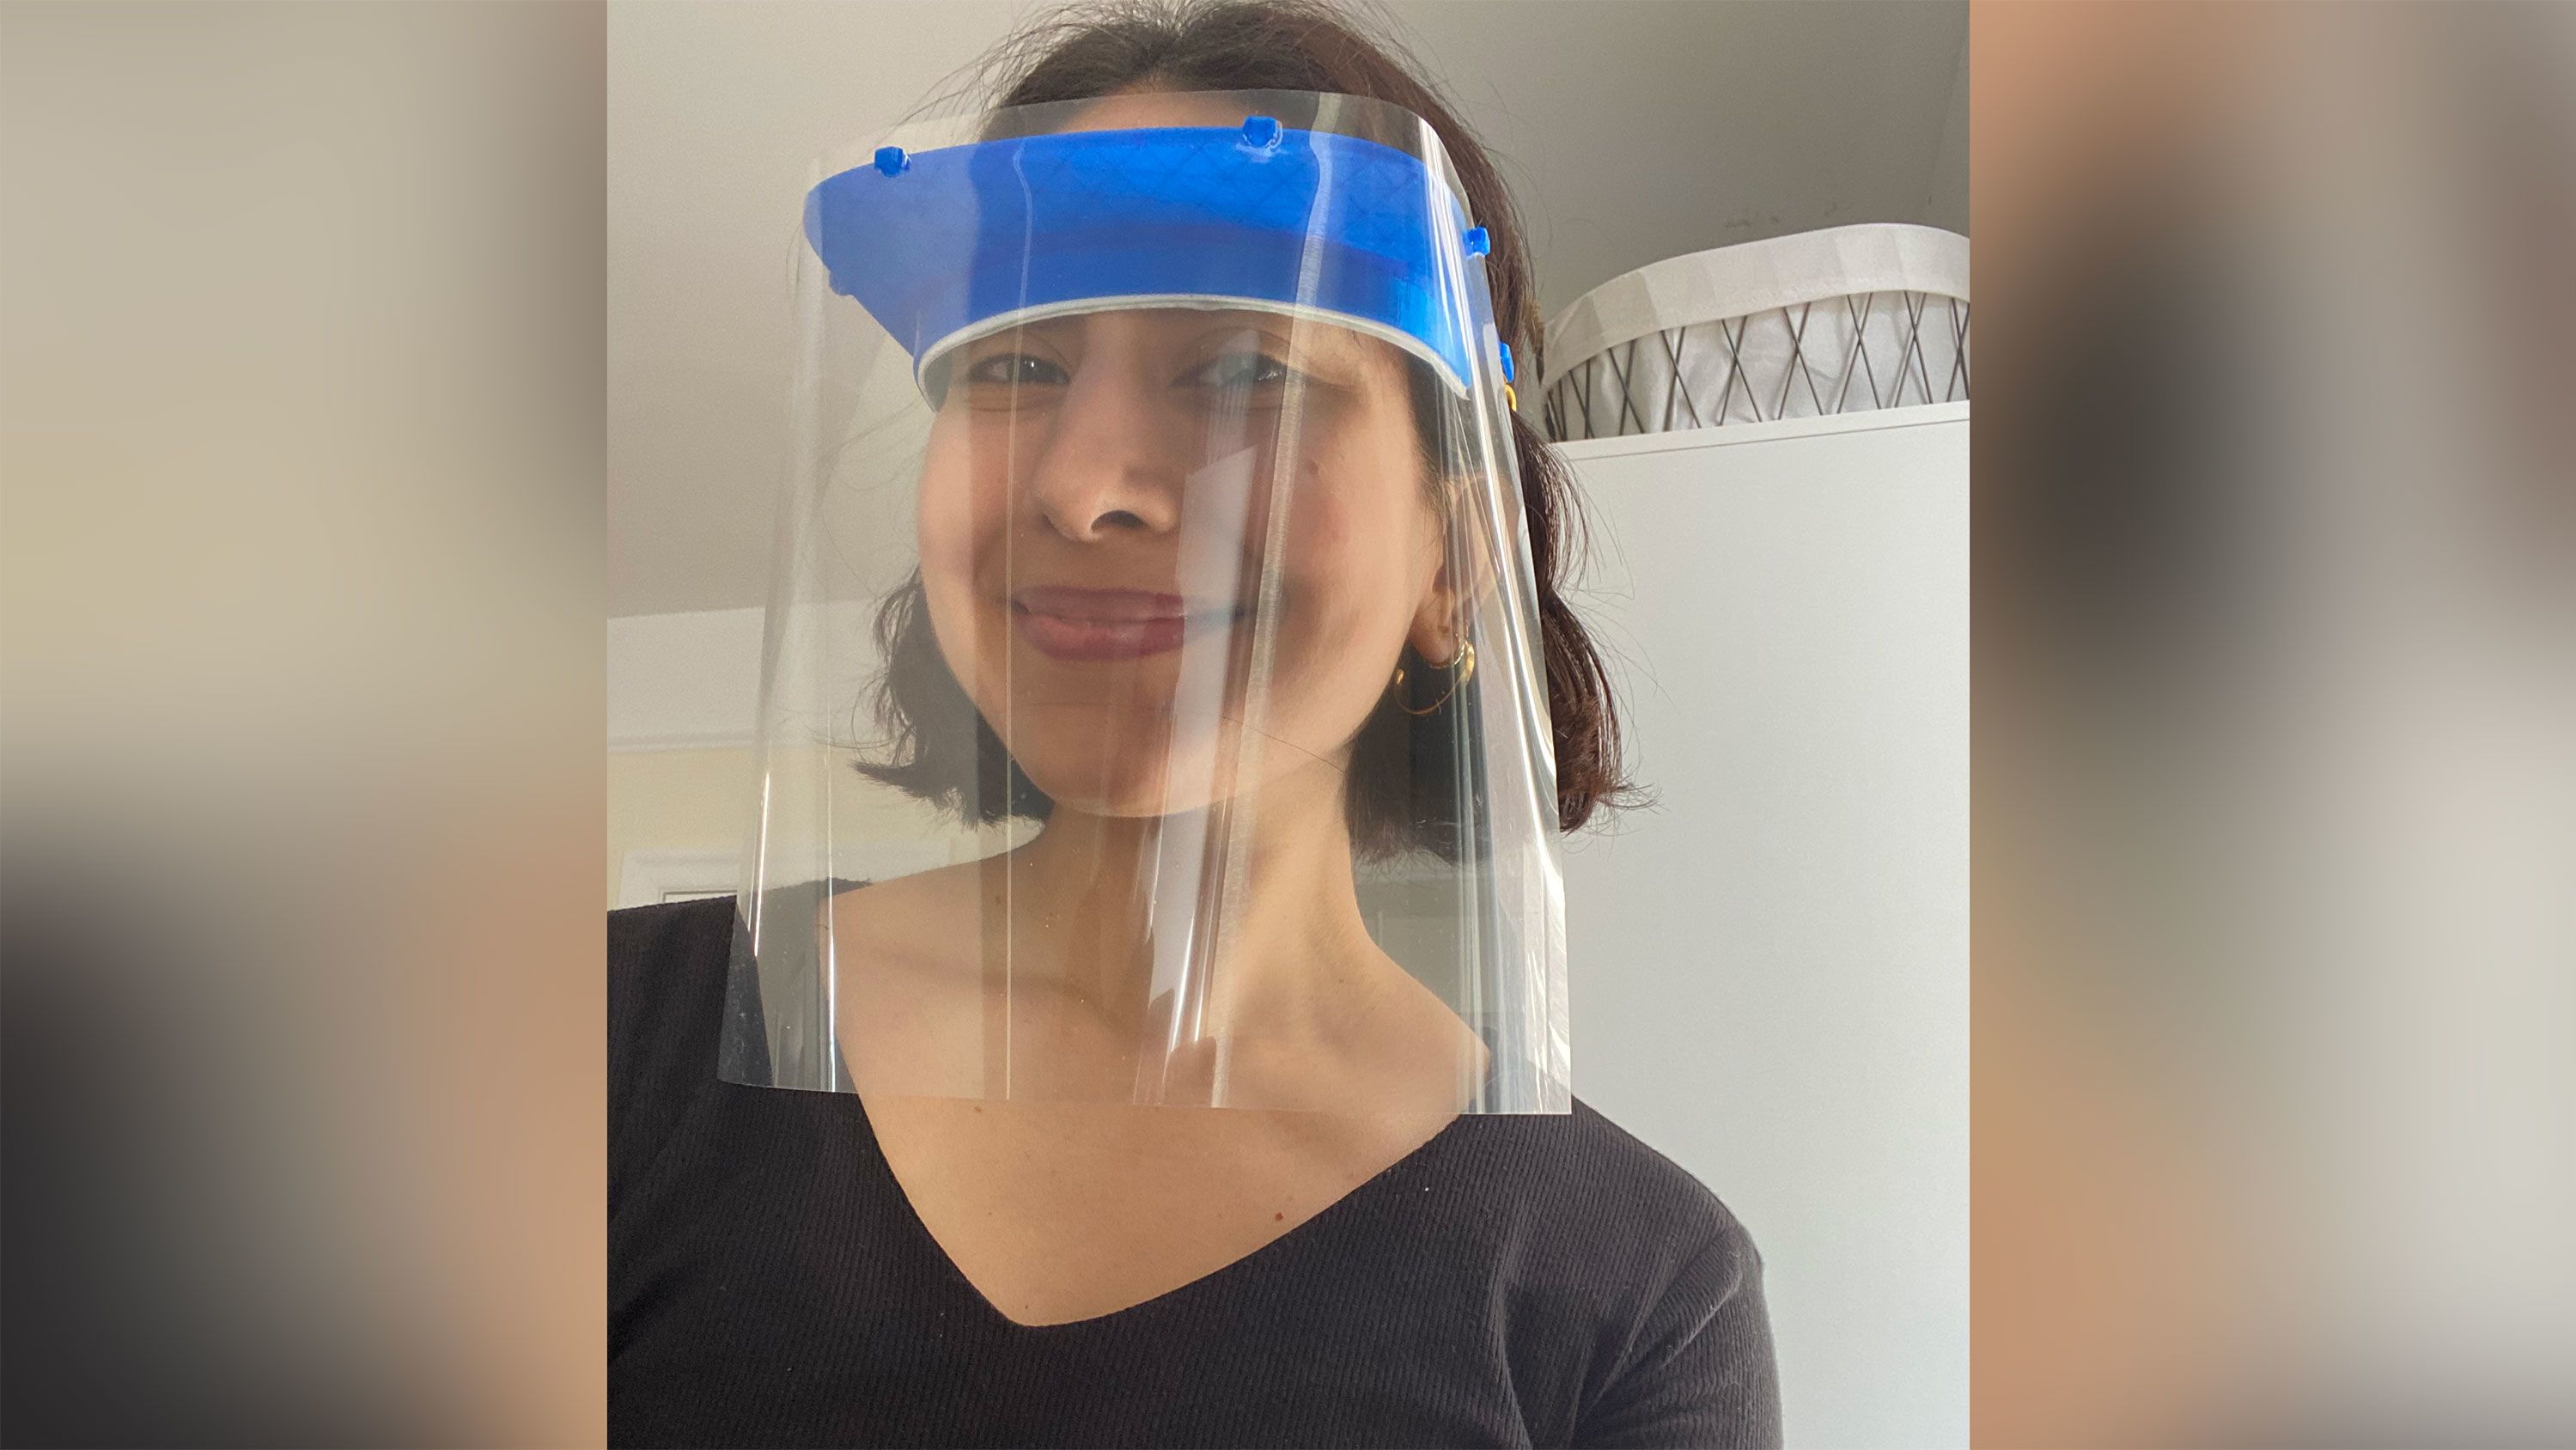 Madiha Choksi wears one of the face shields 3D printed for health care workers in New York.